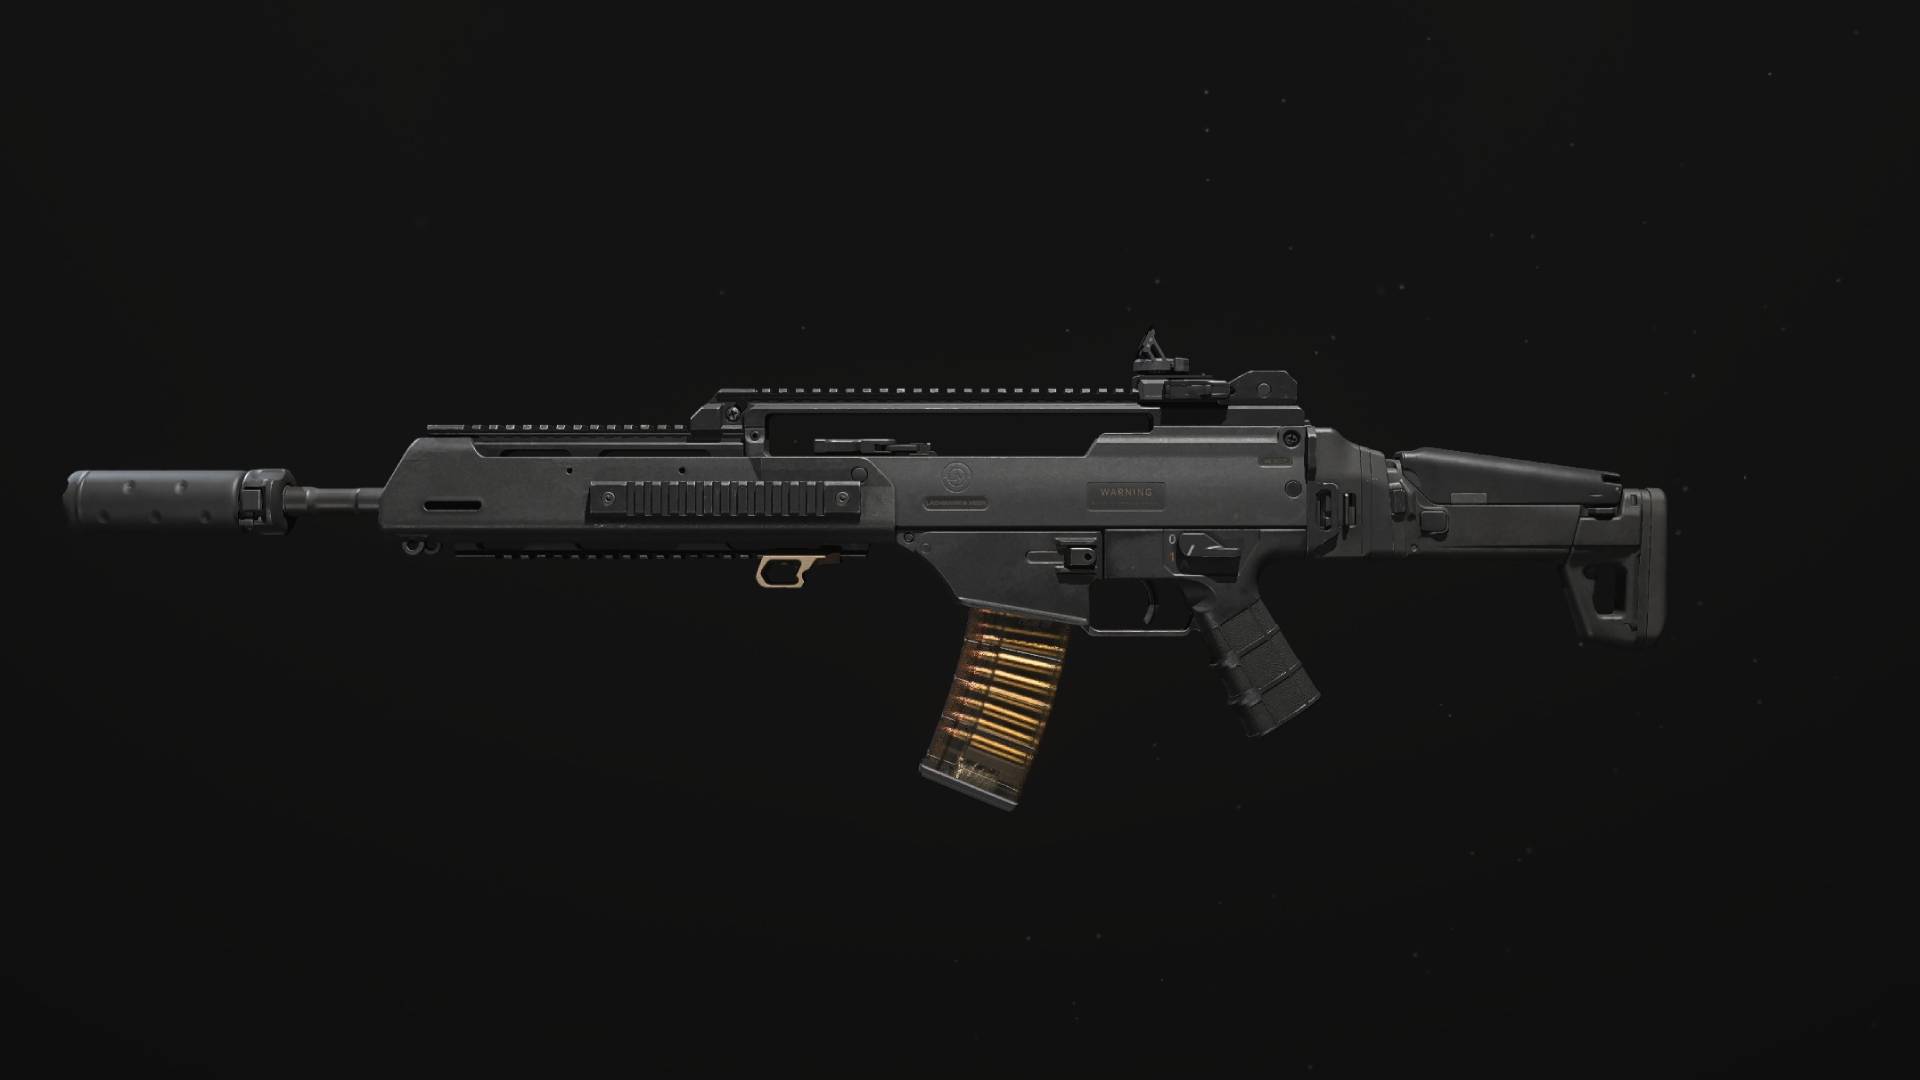 The Holger 556 in Modern Warfare 3 on a black background.